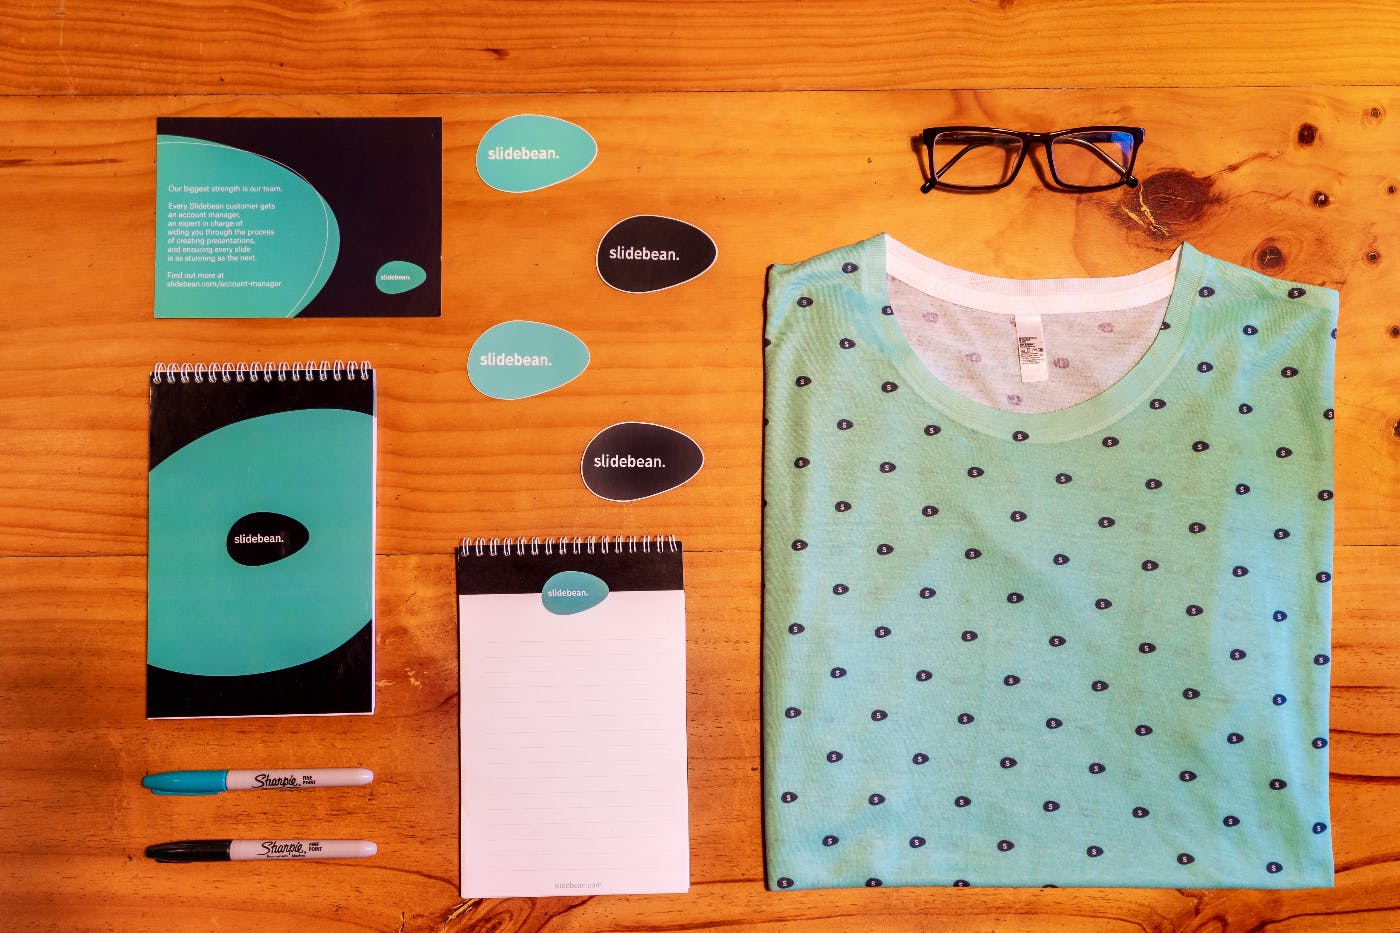 Notebooks, pens, note cards, glasses and a shirt all in branded colors